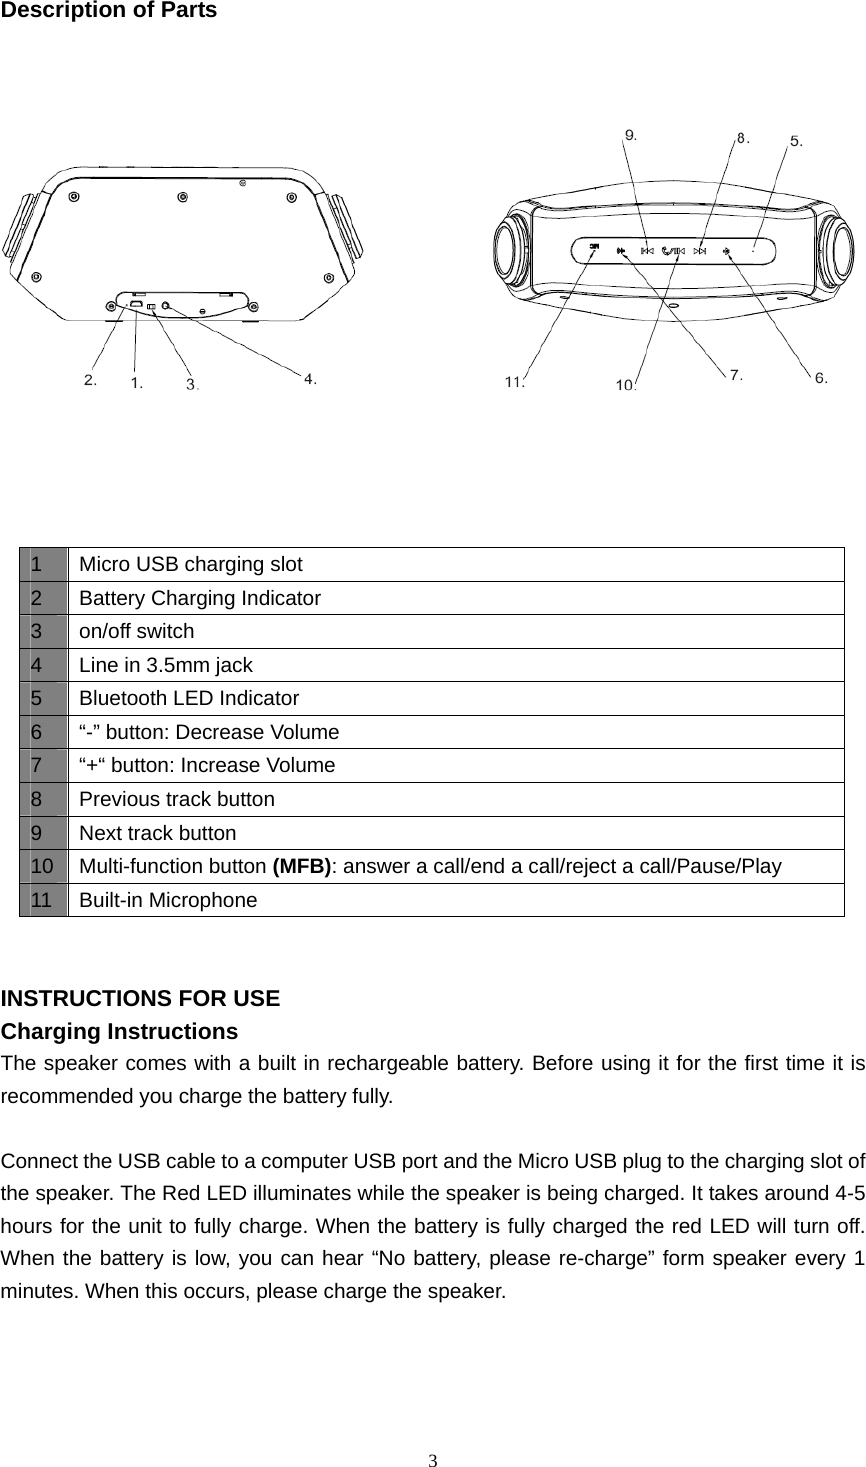  3  Description of Parts                                INSTRUCTIONS FOR USE Charging Instructions The speaker comes with a built in rechargeable battery. Before using it for the first time it is recommended you charge the battery fully.    Connect the USB cable to a computer USB port and the Micro USB plug to the charging slot of the speaker. The Red LED illuminates while the speaker is being charged. It takes around 4-5 hours for the unit to fully charge. When the battery is fully charged the red LED will turn off. When the battery is low, you can hear “No battery, please re-charge” form speaker every 1 minutes. When this occurs, please charge the speaker.     1  Micro USB charging slot 2  Battery Charging Indicator 3 on/off switch 4  Line in 3.5mm jack 5  Bluetooth LED Indicator 6  “-” button: Decrease Volume 7  “+“ button: Increase Volume 8  Previous track button 9  Next track button 10  Multi-function button (MFB): answer a call/end a call/reject a call/Pause/Play 11 Built-in Microphone 